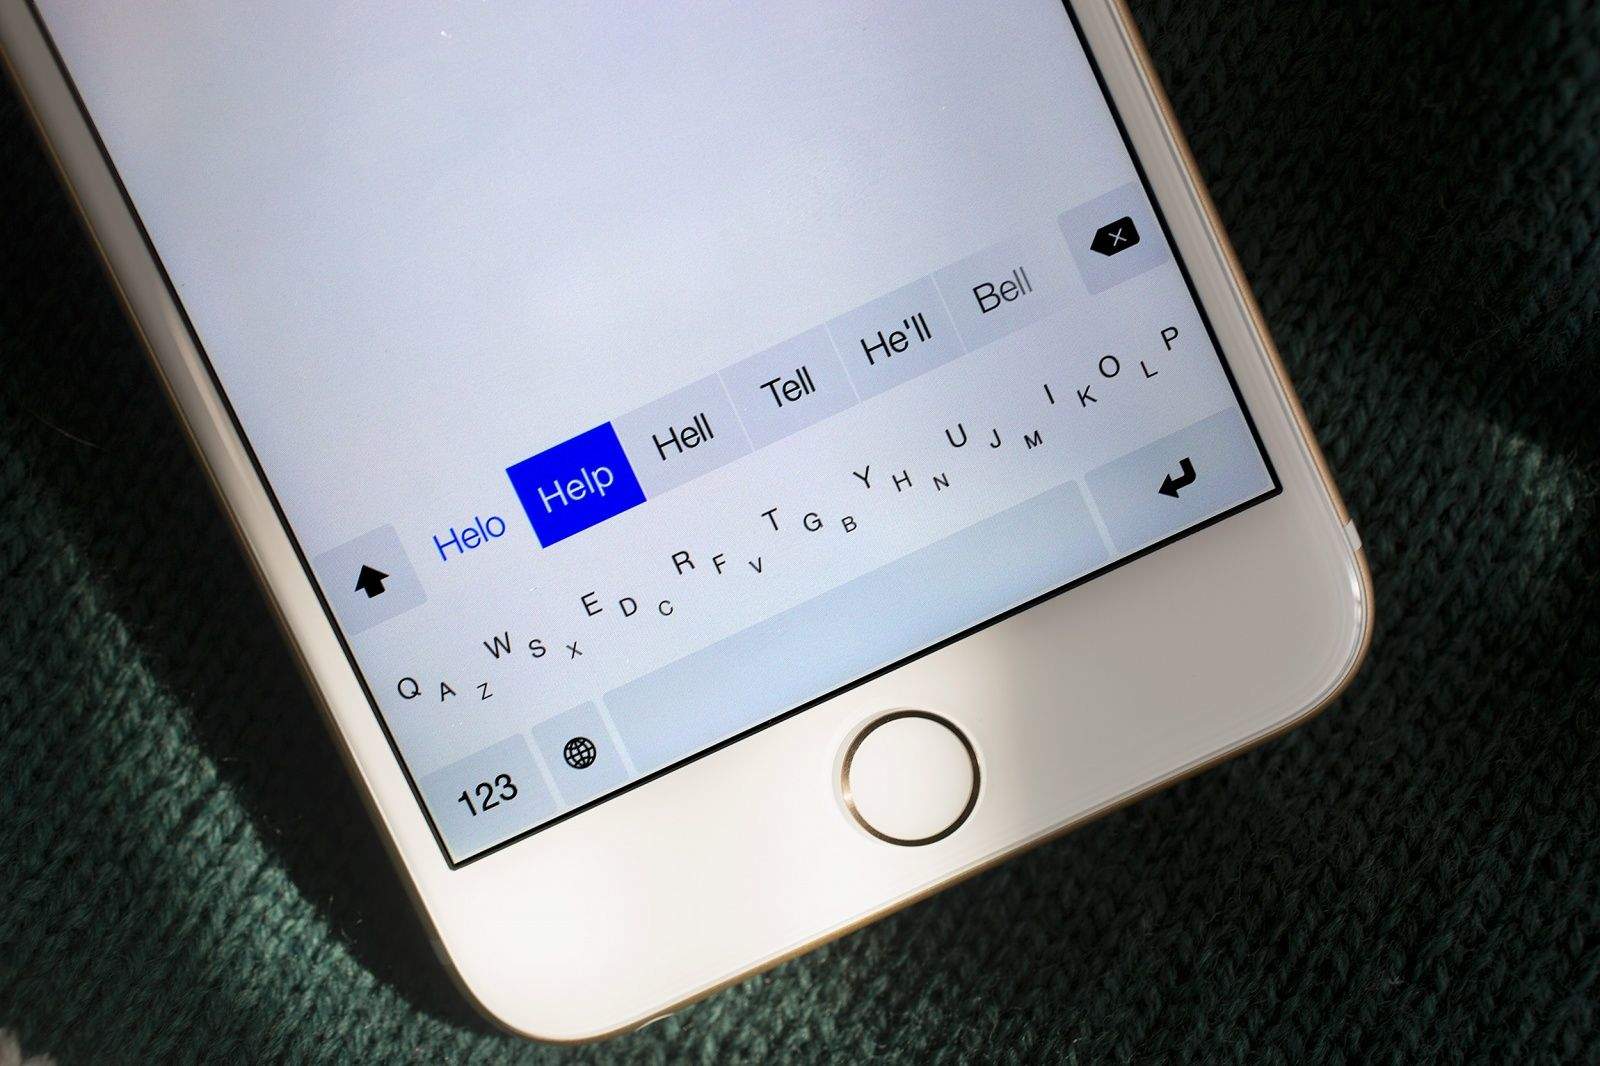 Minuum is one of the many third-party keyboards for iOS 8. Photo: Jim Merithew/Cult of Mac